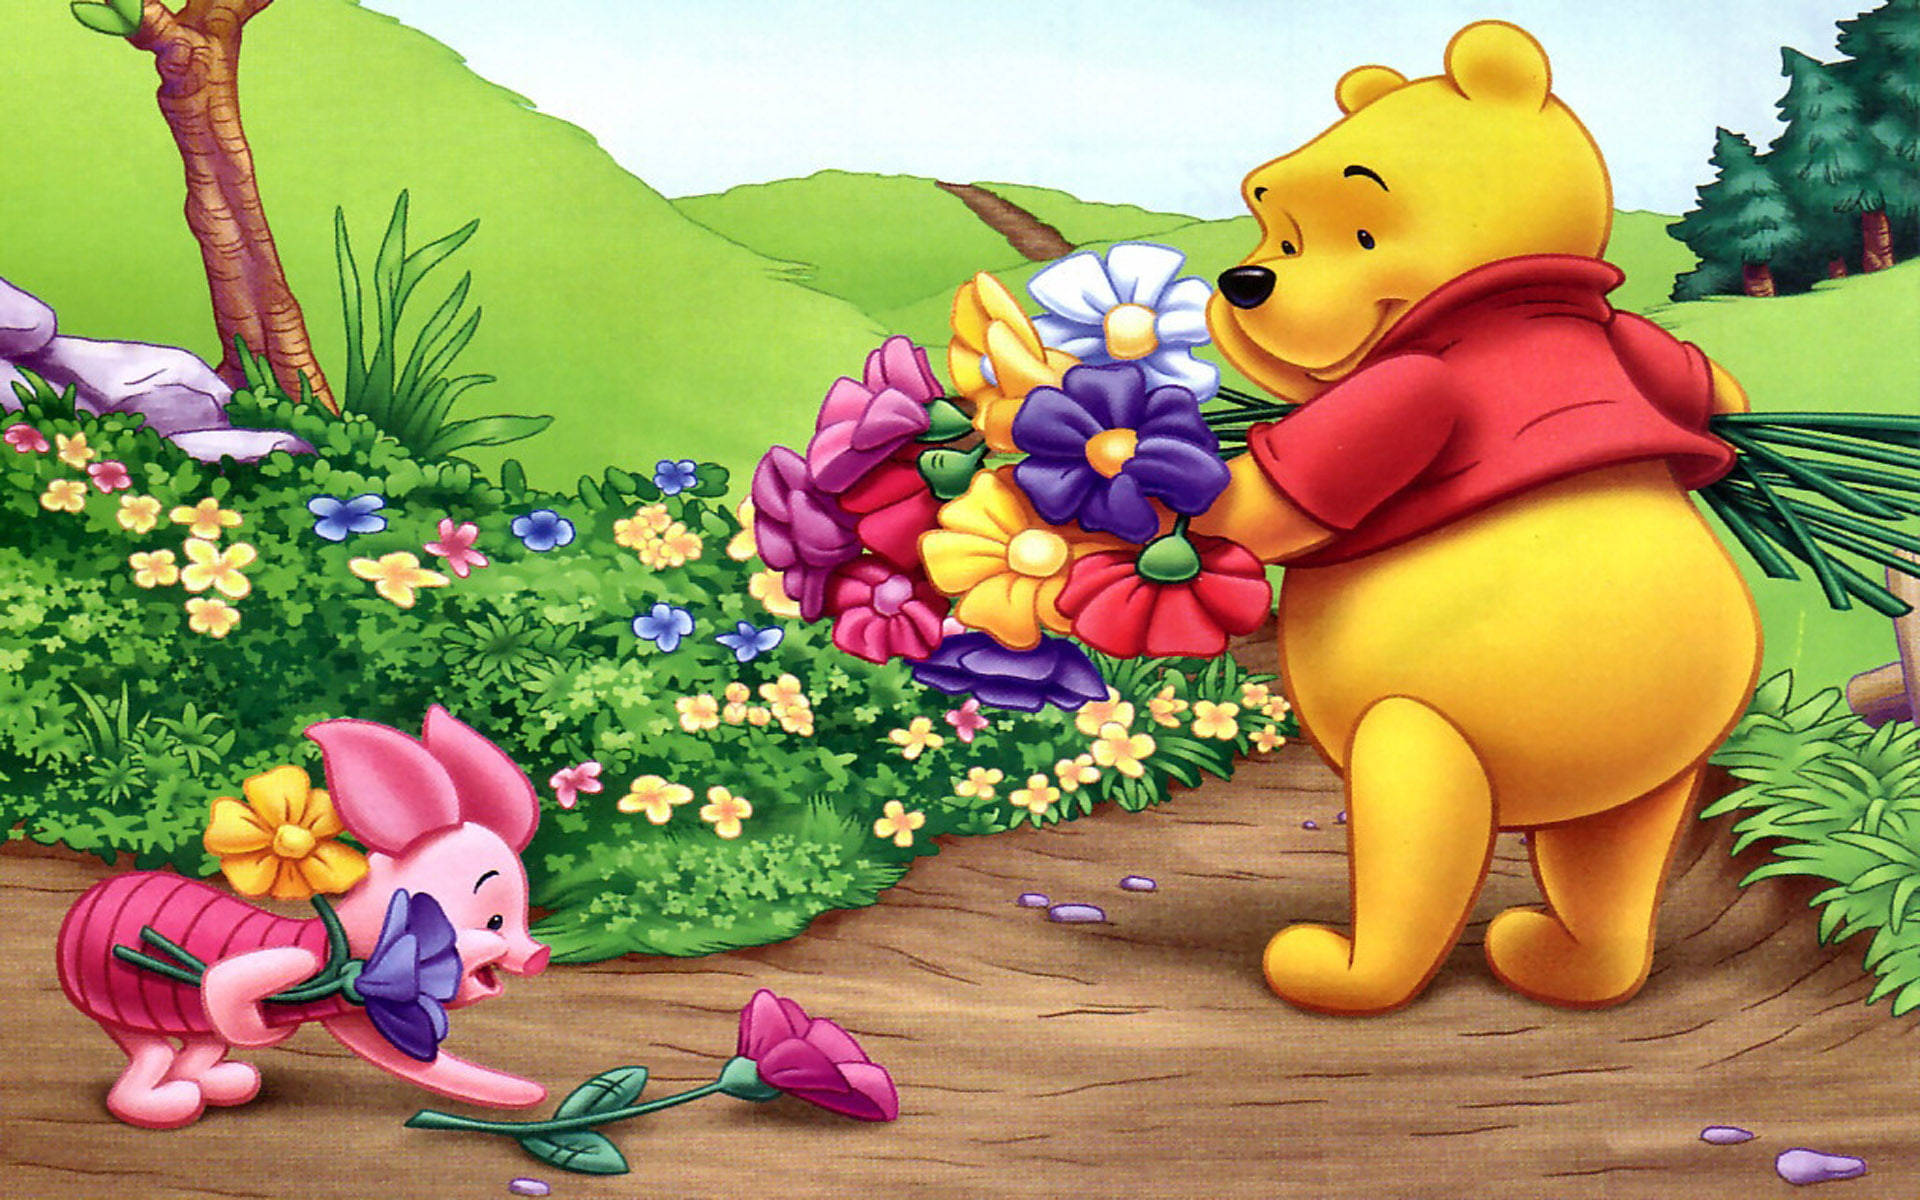 Cute Winnie The Pooh With Flowers Background